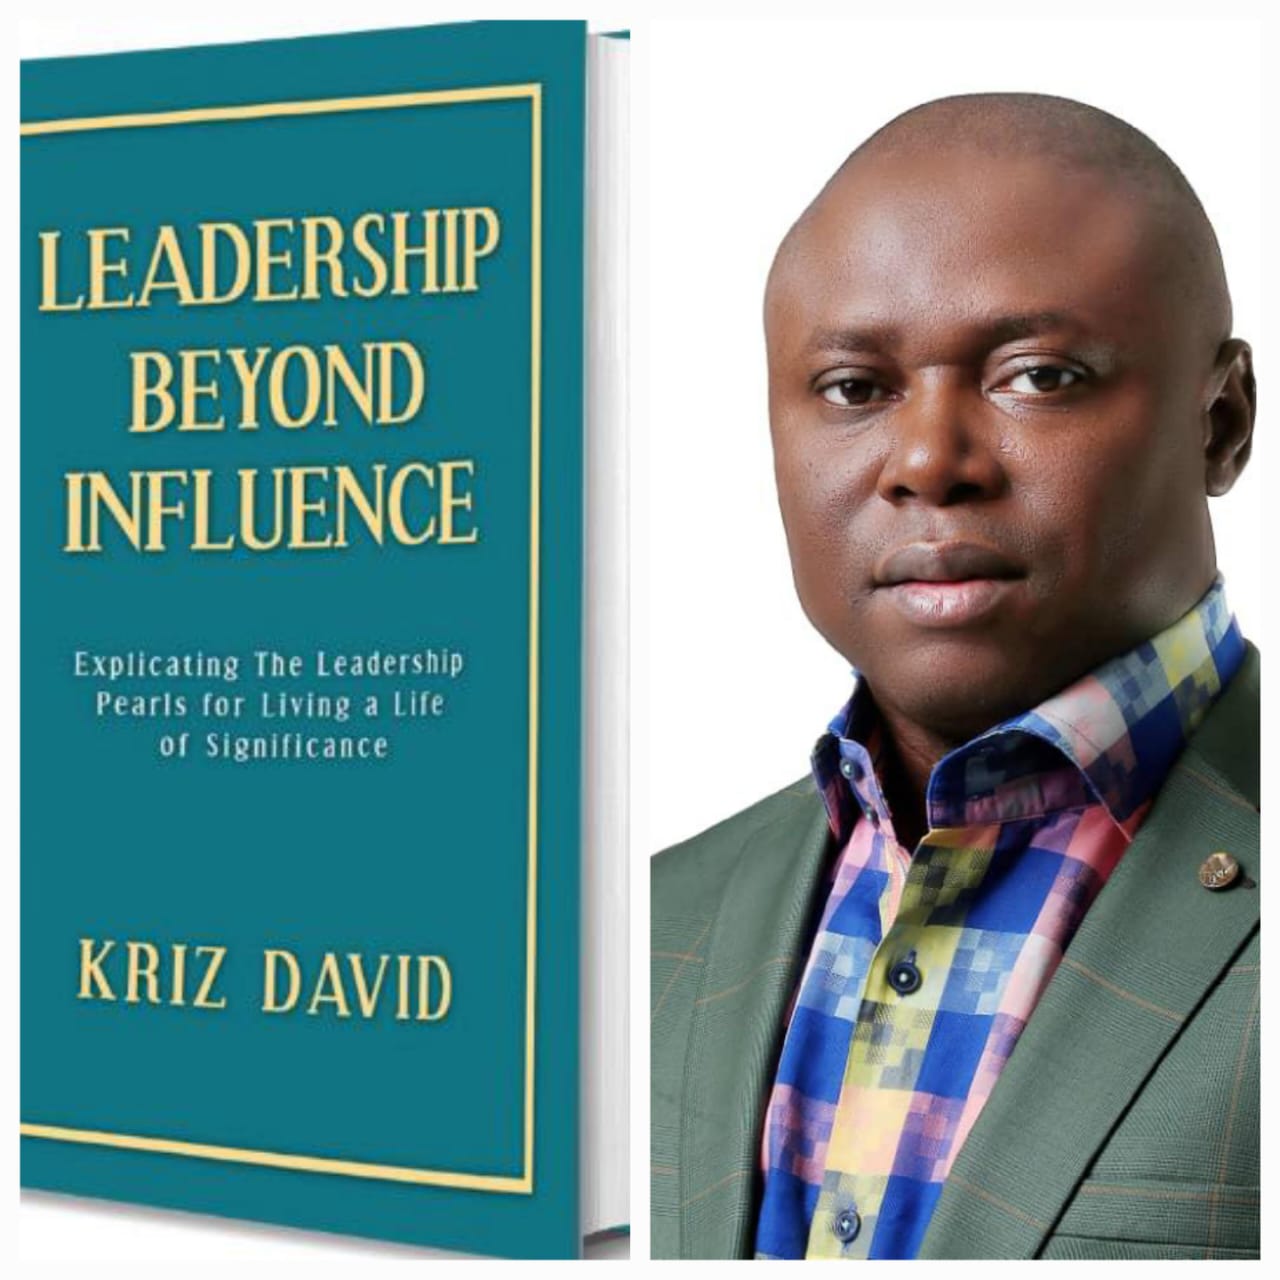 LEADERSHIP BEYOND INFLUENCE KRIZ DAVID's new book shatters traditional leadership concept